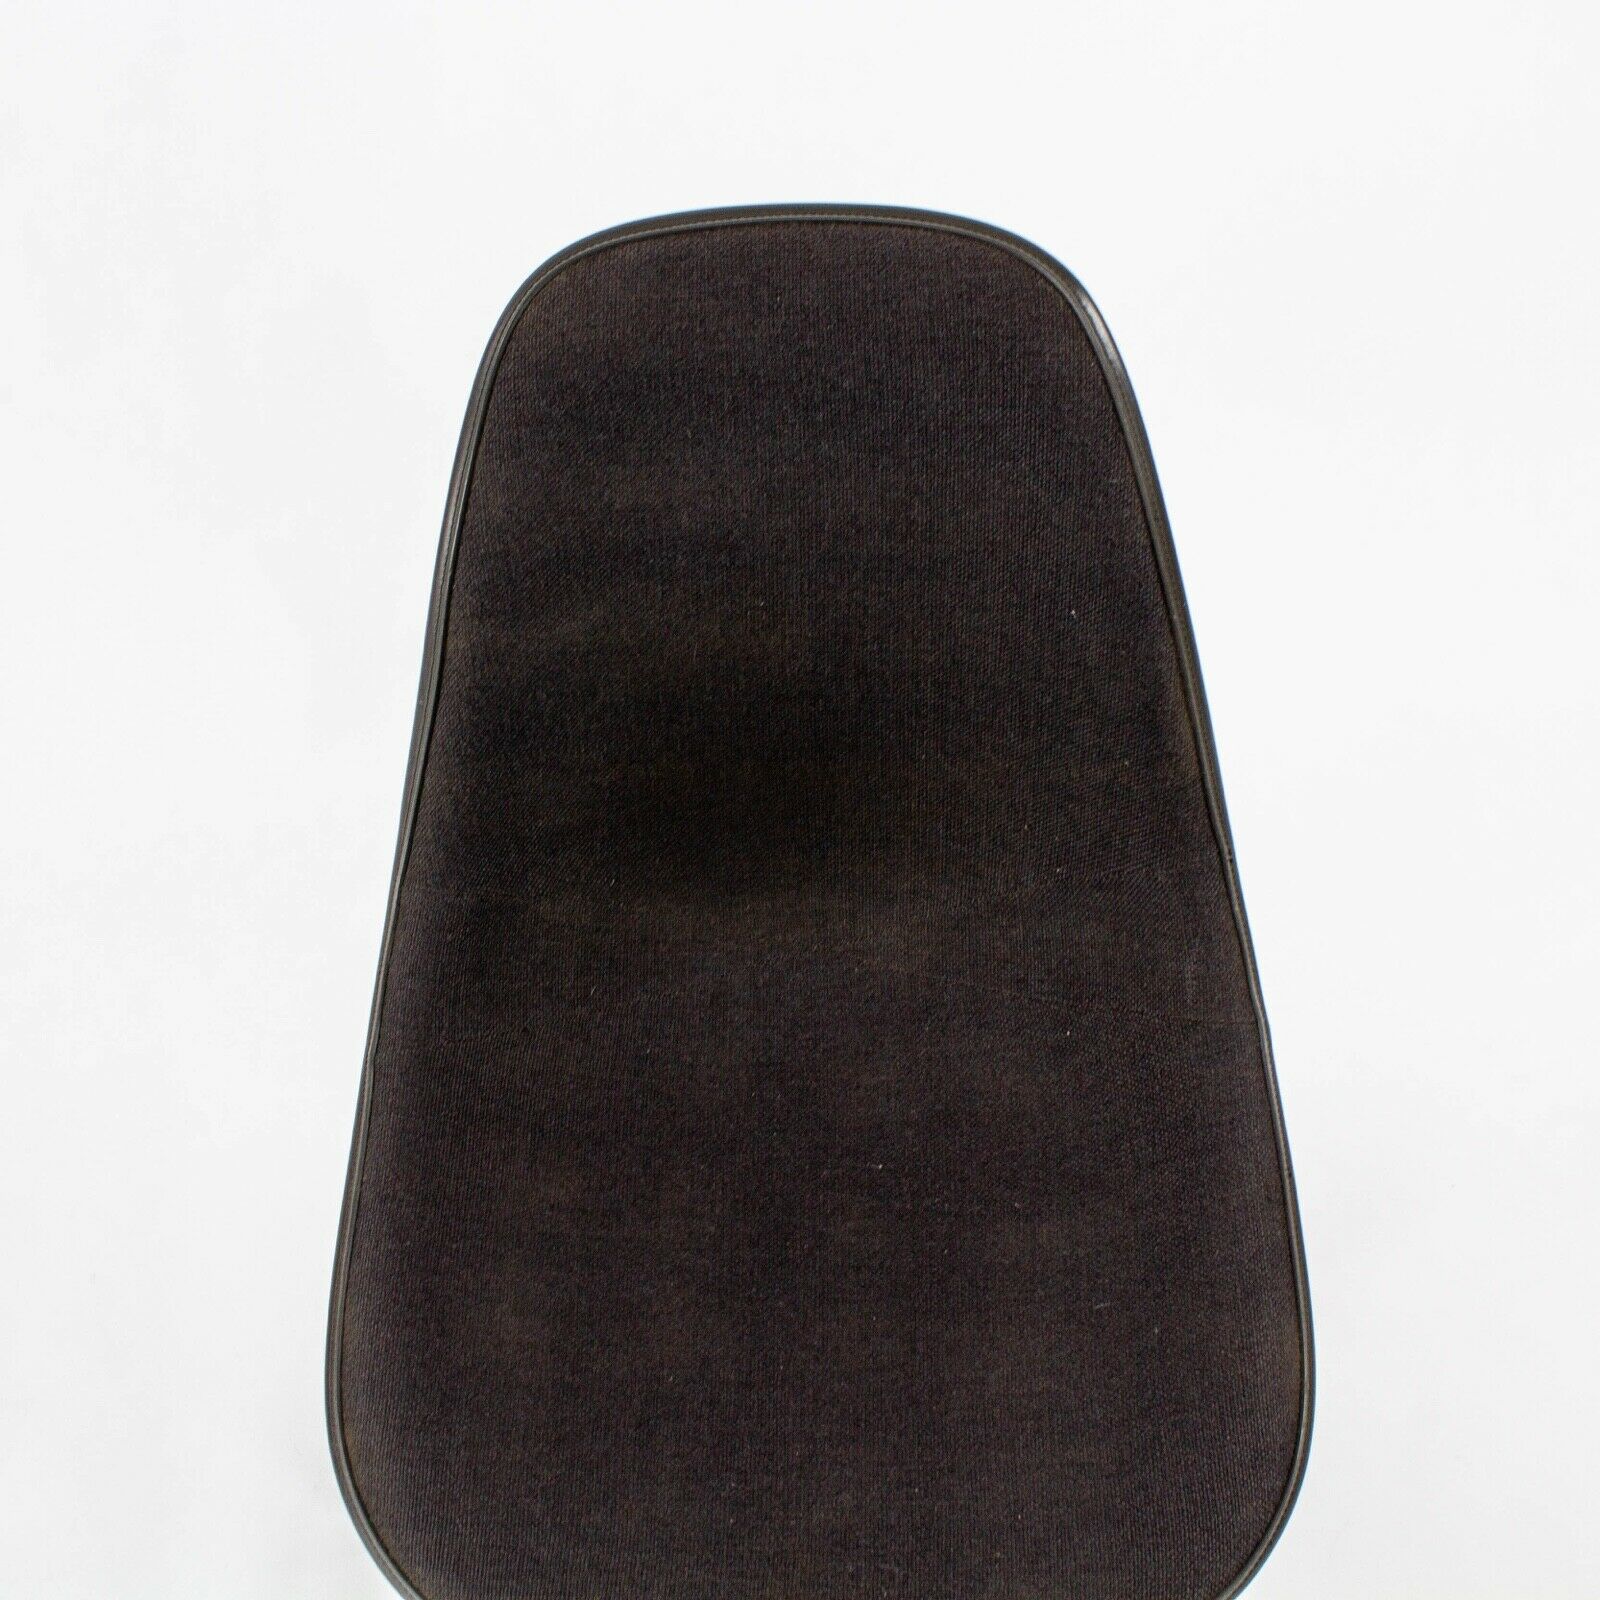 SOLD 1980s Herman Miller Eames Black Fabric Upholstered Side Shell Chair with Wheels